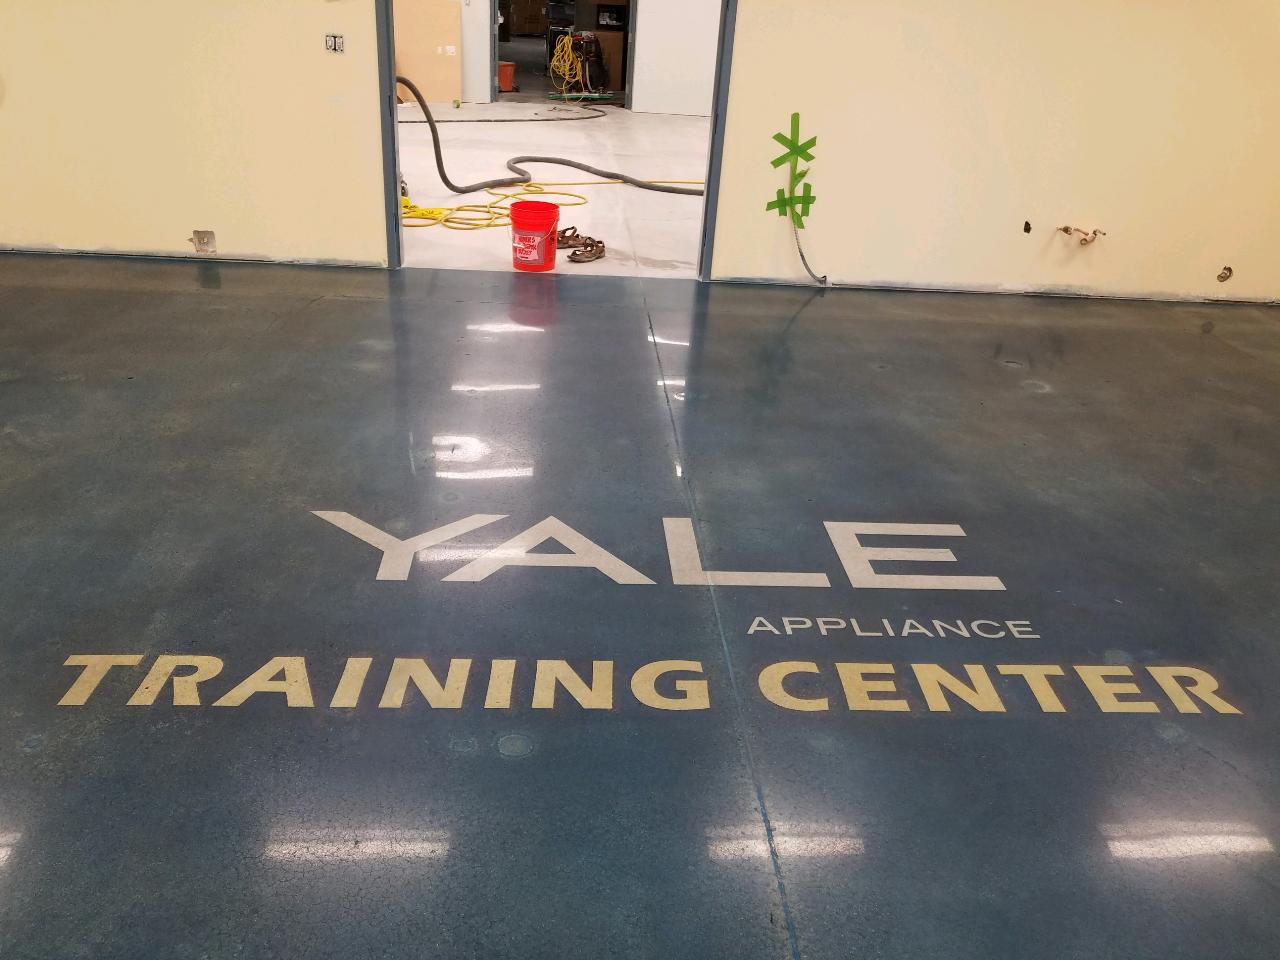 A black polished concrete floor with the logo of the Yale Training Center stained into the surface